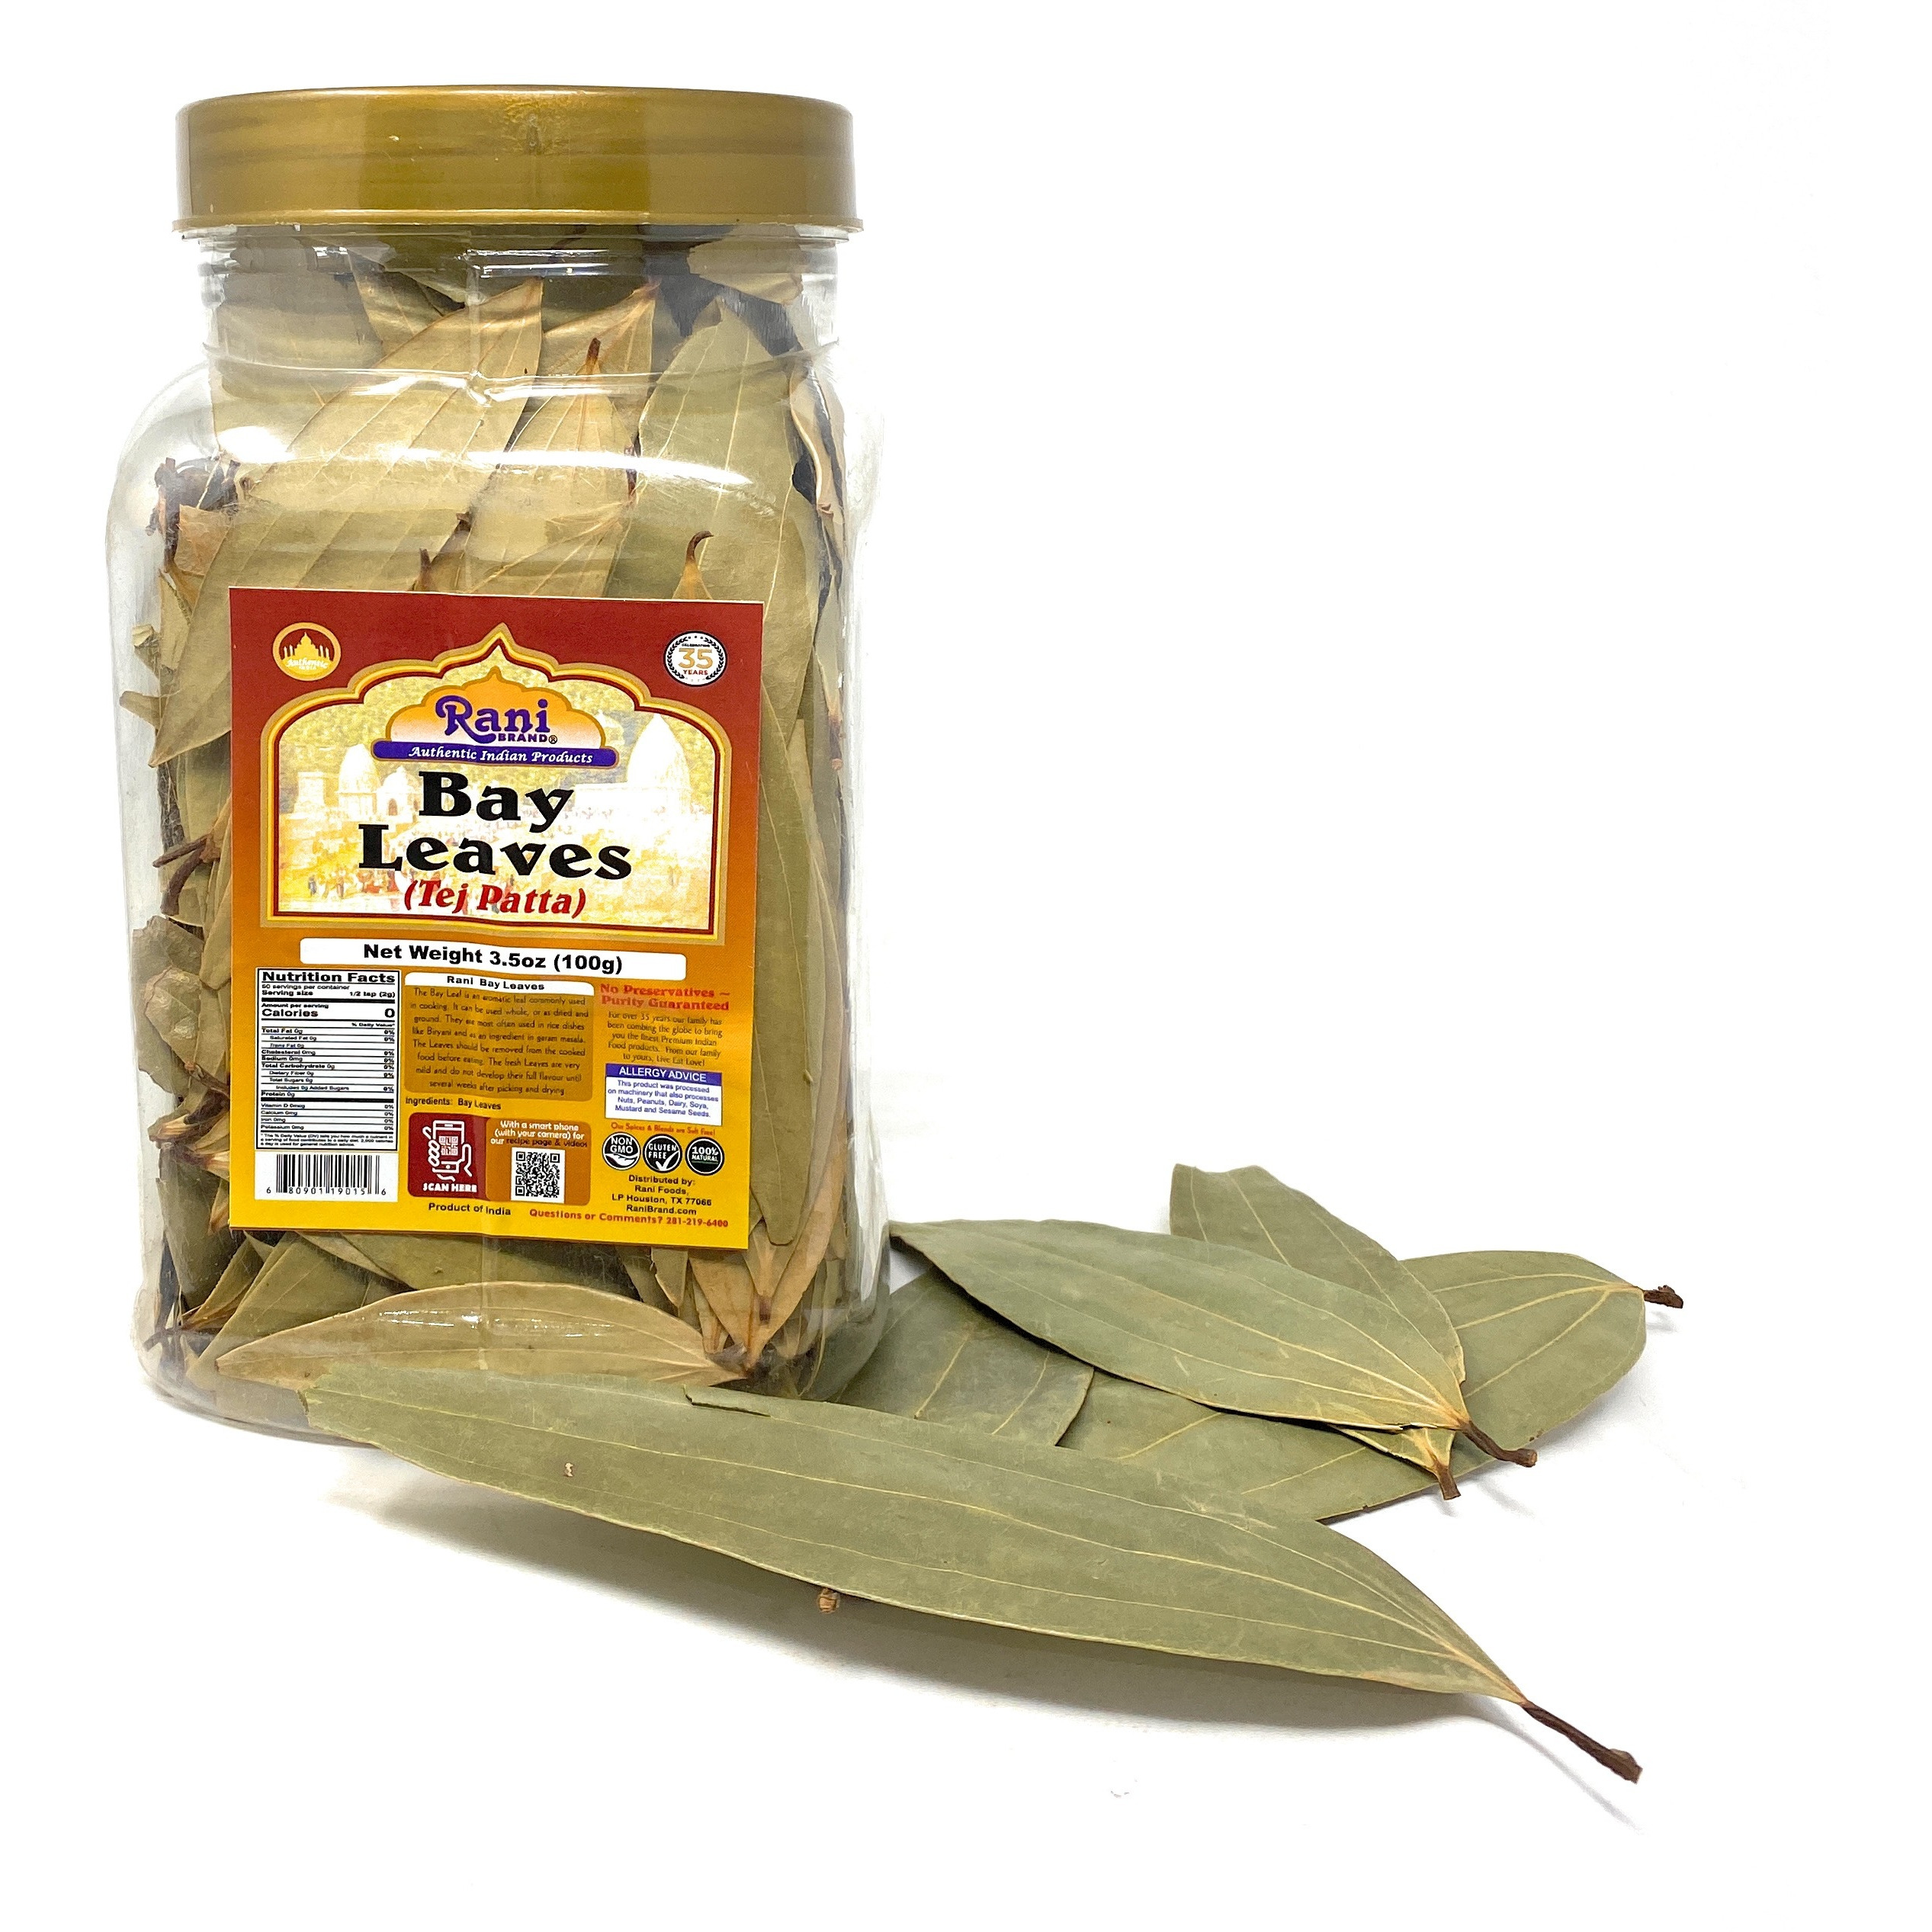 Rani Bay Leaf (Leaves) Whole Spice Hand Selected Extra Large 100g (3.5oz) PET Jar, All Natural ~ Gluten Friendly | NON-GMO | Vegan | Indian Origin (Tej Patta)